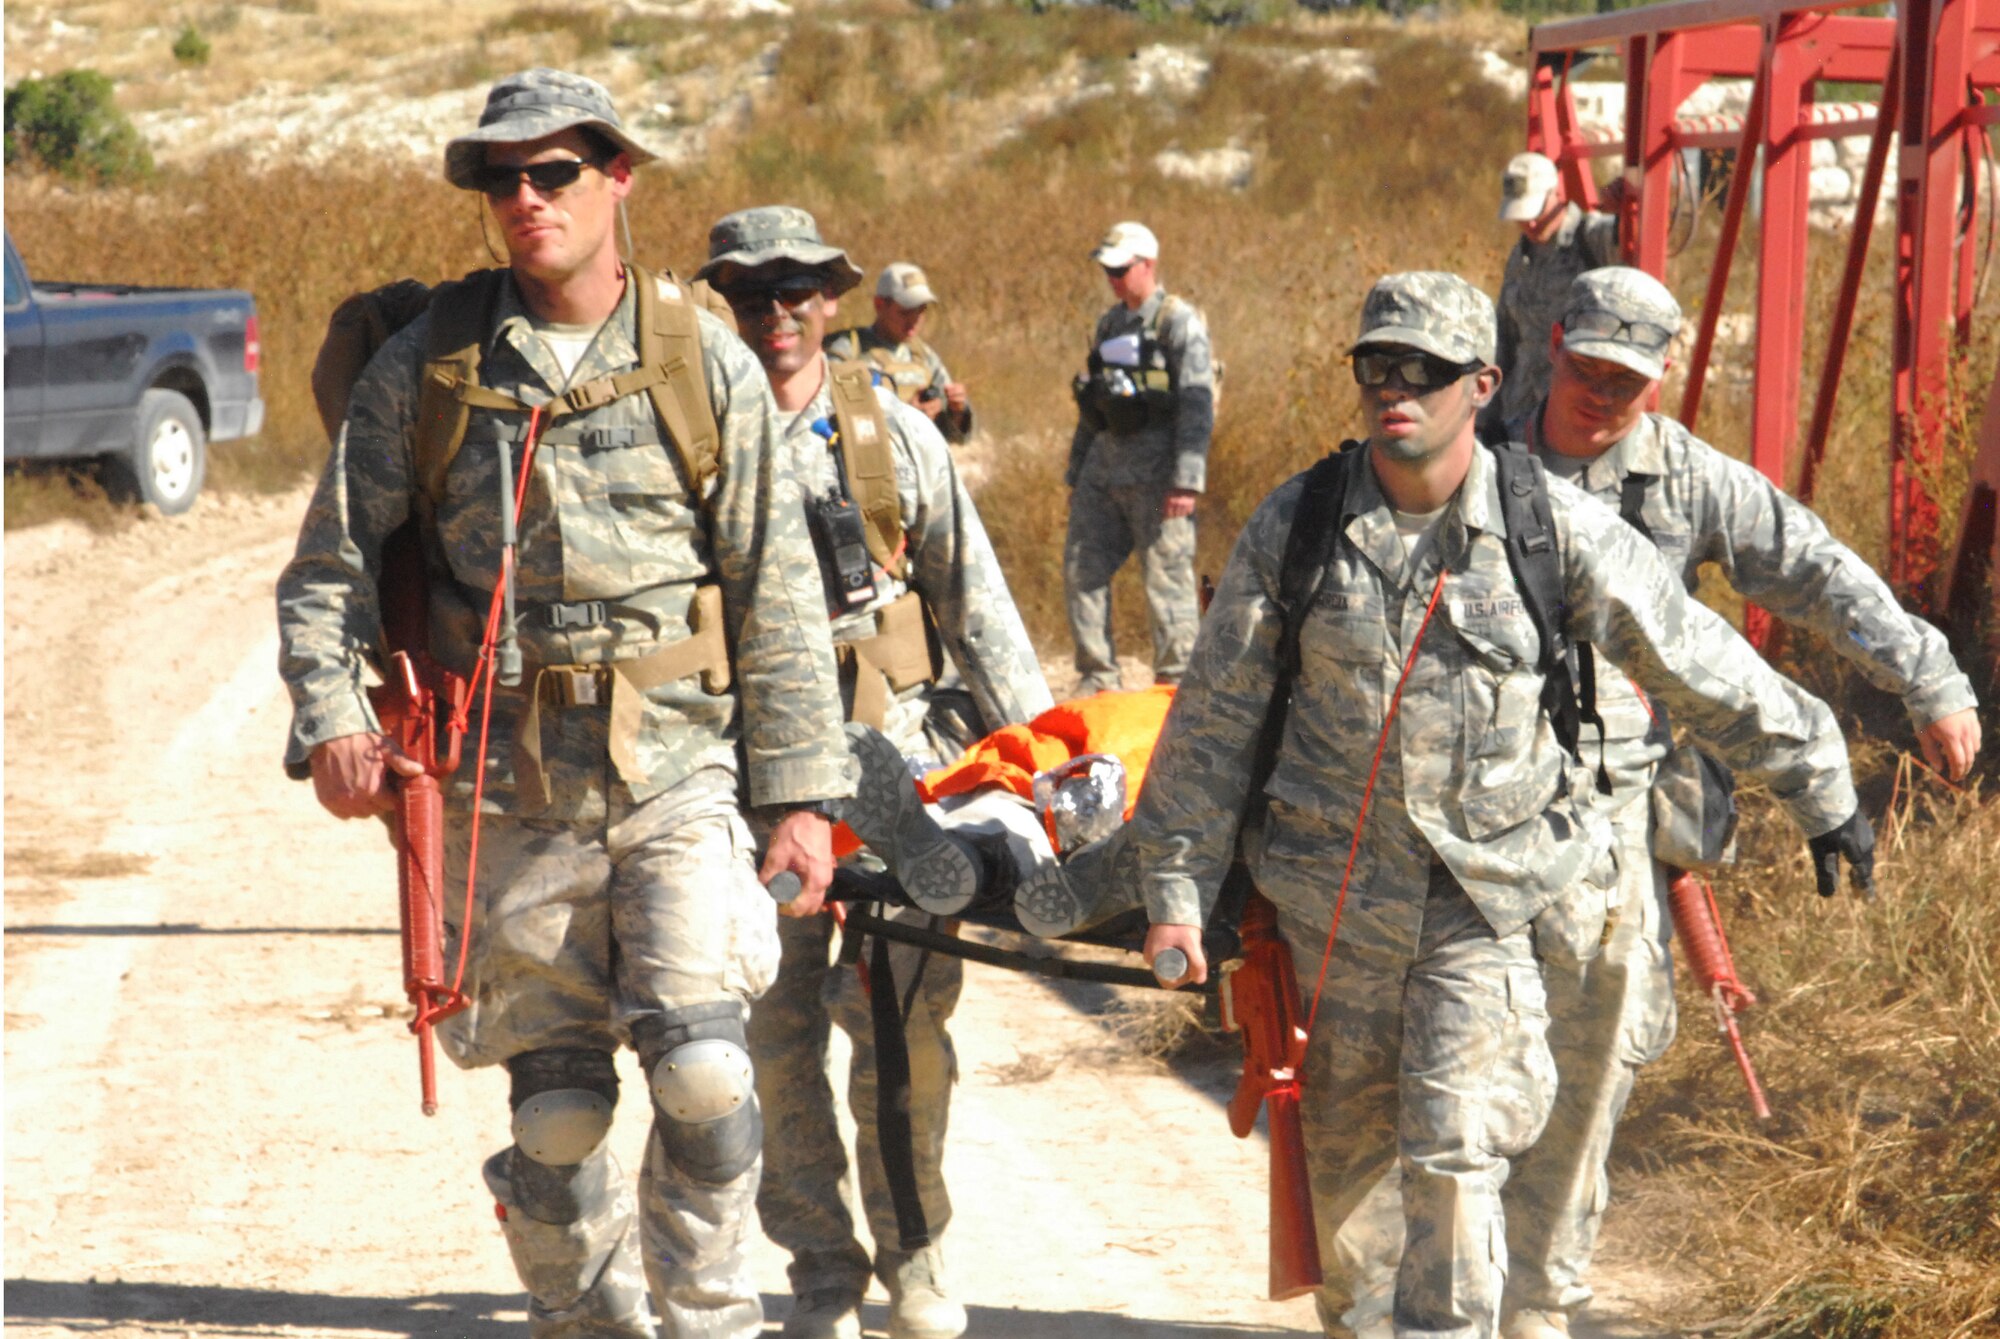 Airmen from the 460th Medical Group use a liter to carry a patient during a training exercise Oct. 3, 2015, at Fort Carson, Colo. The 460th MDG completed annual combat leadership and combat medic training in order to prepare themselves for situations they could find themselves in while deployed in a hostile environment. (Courtesy photo)